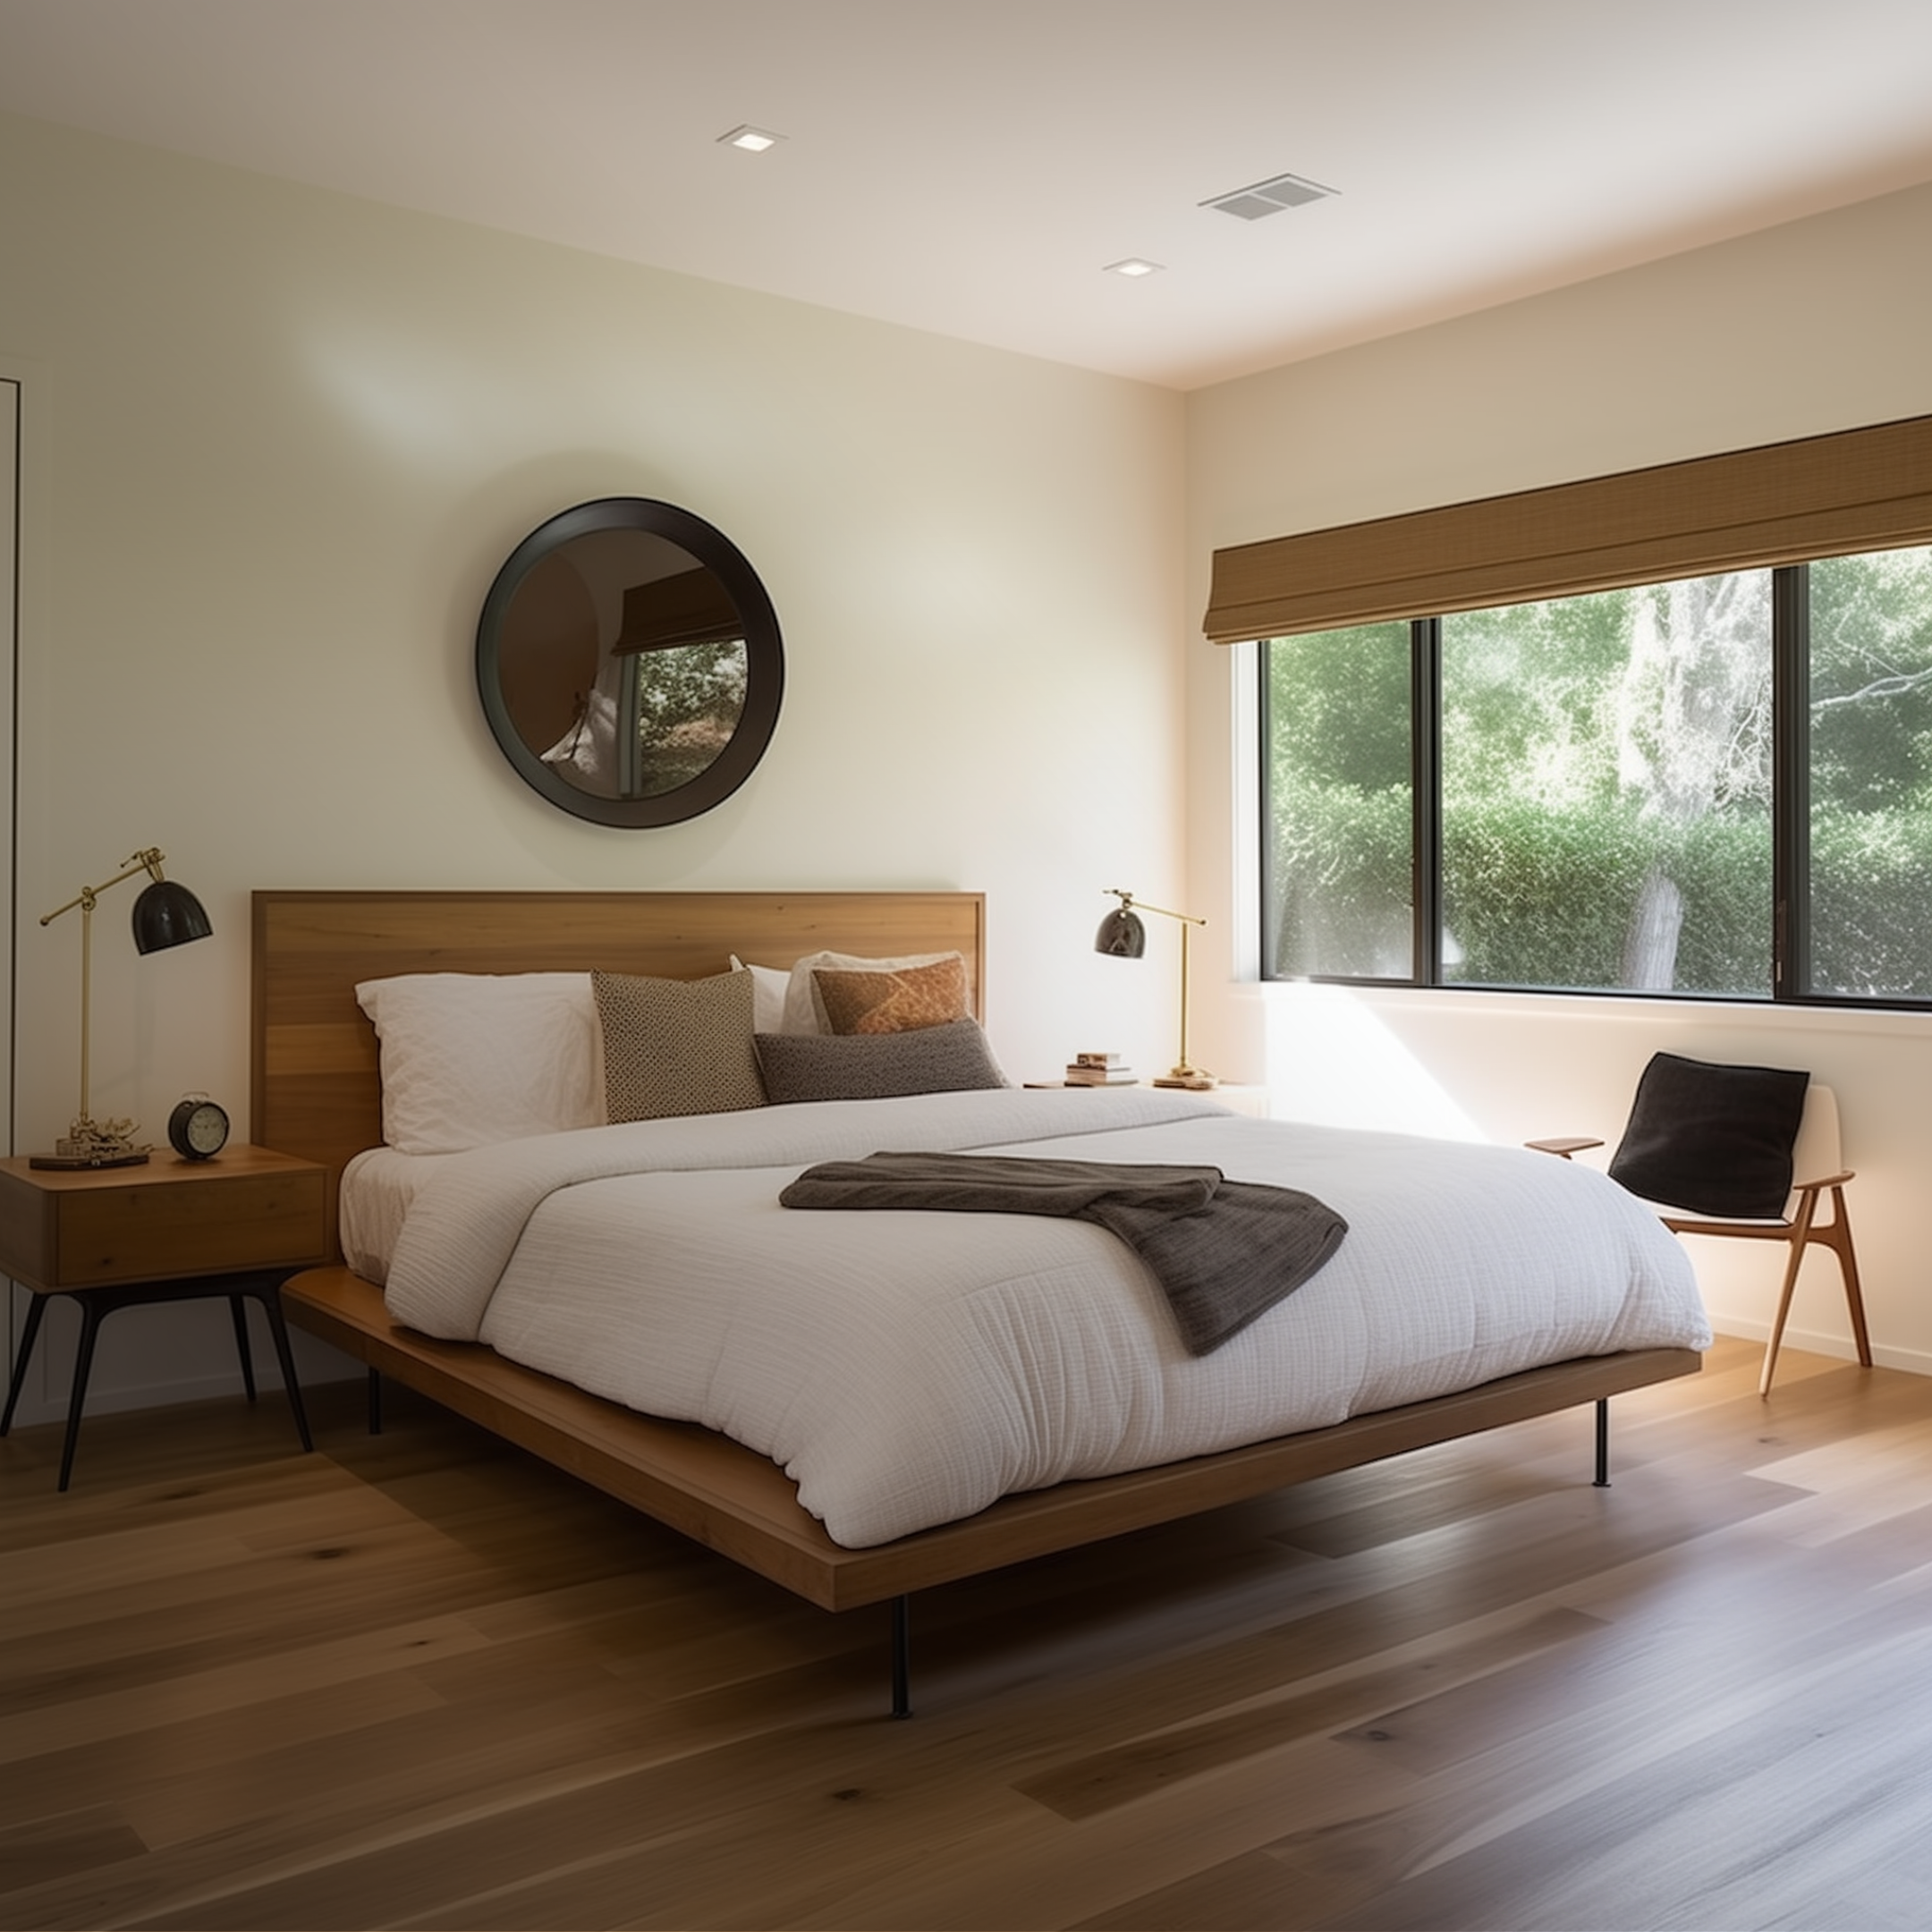 Discover a cozy bedroom oasis at our Tacoma, Washington store, featuring stylish bed frames, nightstands, and décor to create your dream retreat.